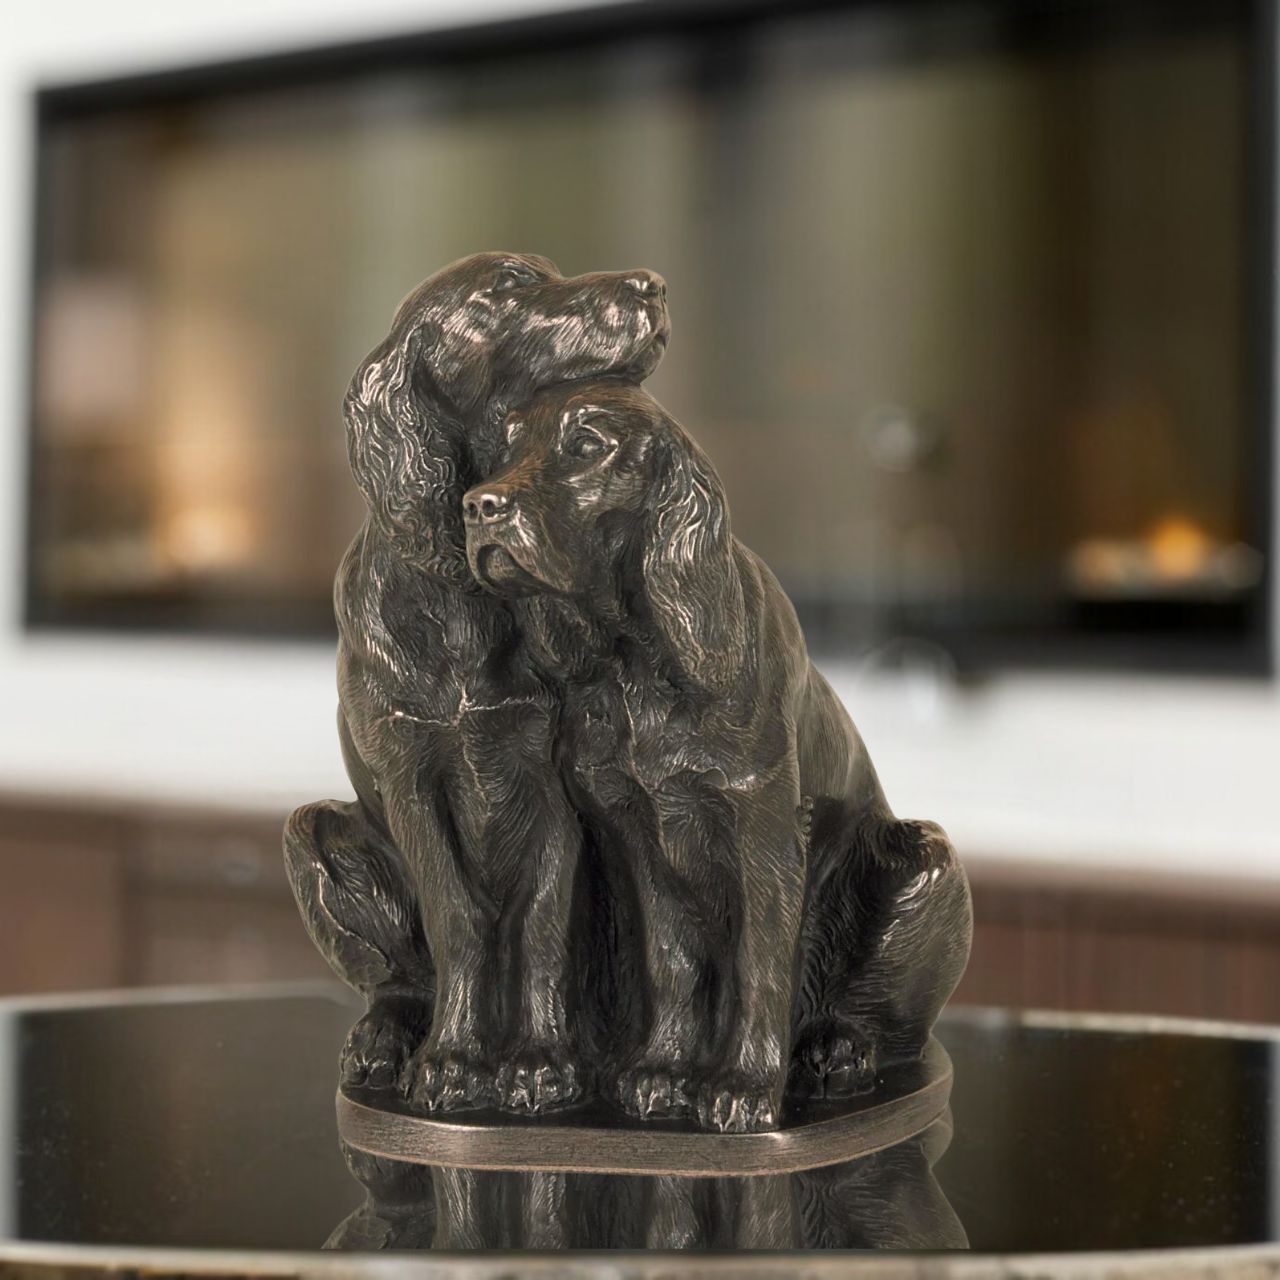 Genesis Pair of Spaniels  A beautiful piece of bronze sculpture depicting a pair of Spaniels  Genesis Fine Arts has evolved into a much loved and world famous Irish brand to produce a striking range of handcrafted cold cast bronze sculptures.